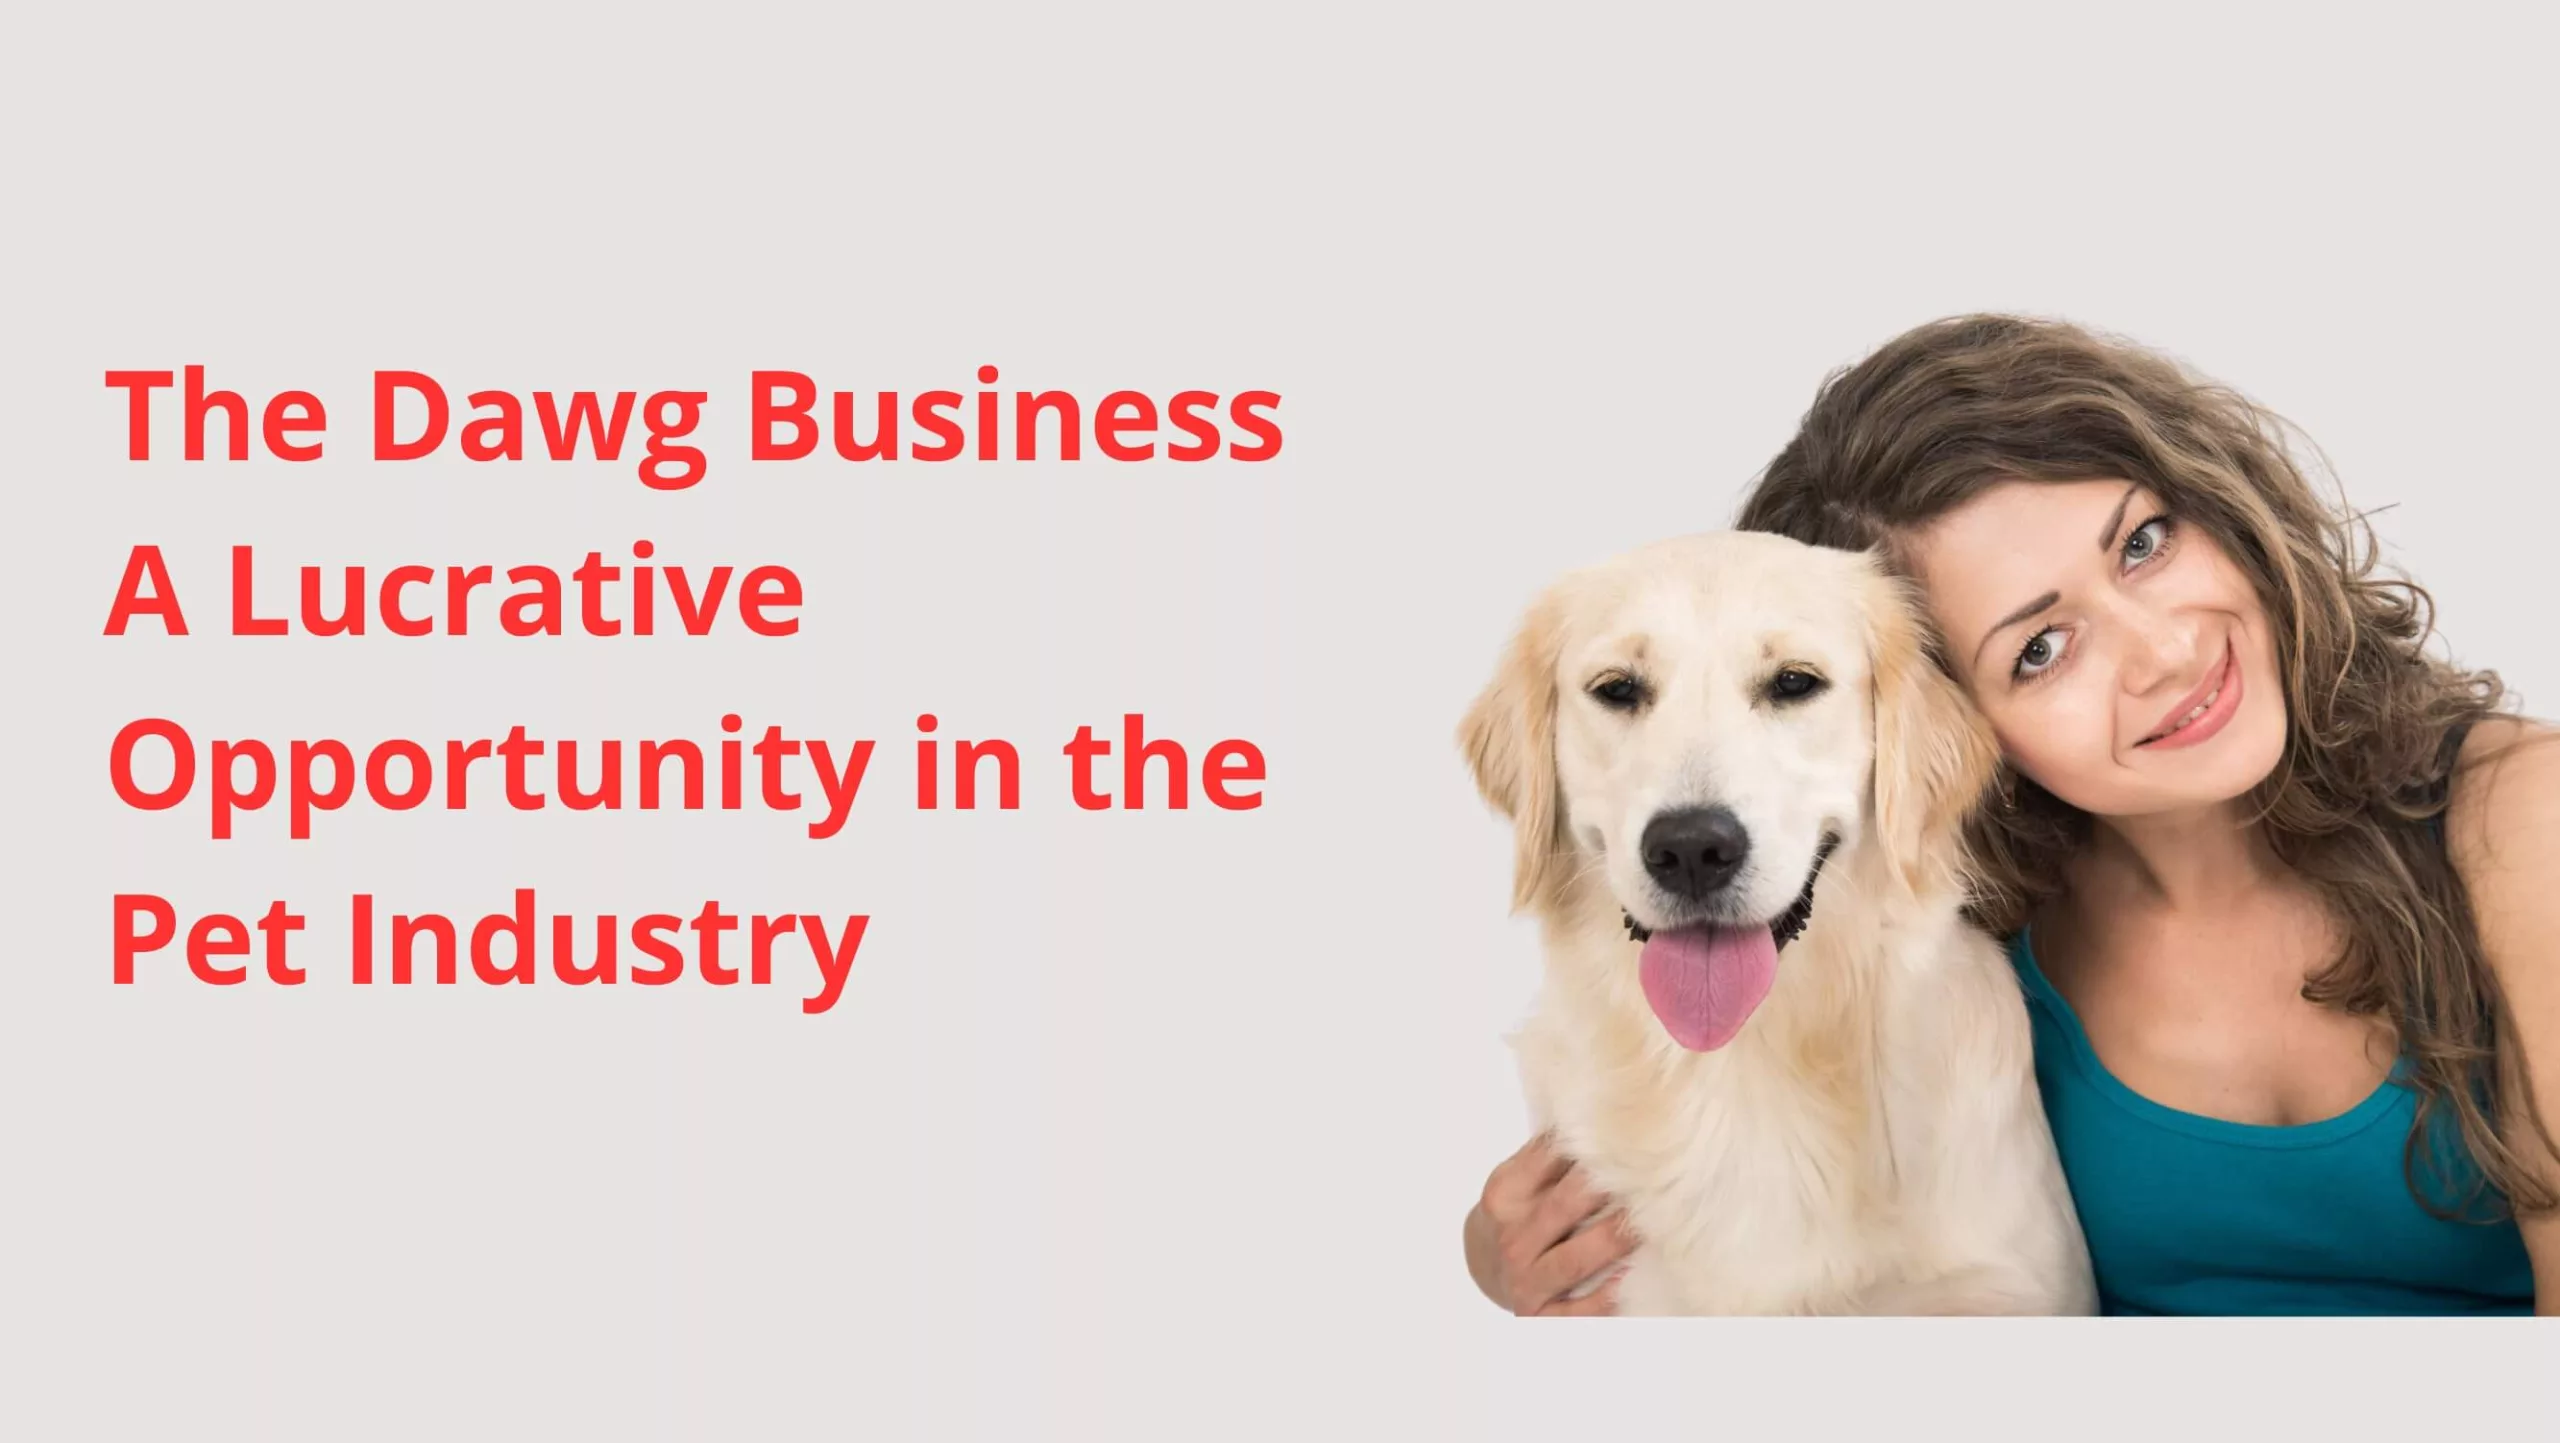 The Dawg Business: A Lucrative Opportunity in the Pet Industry